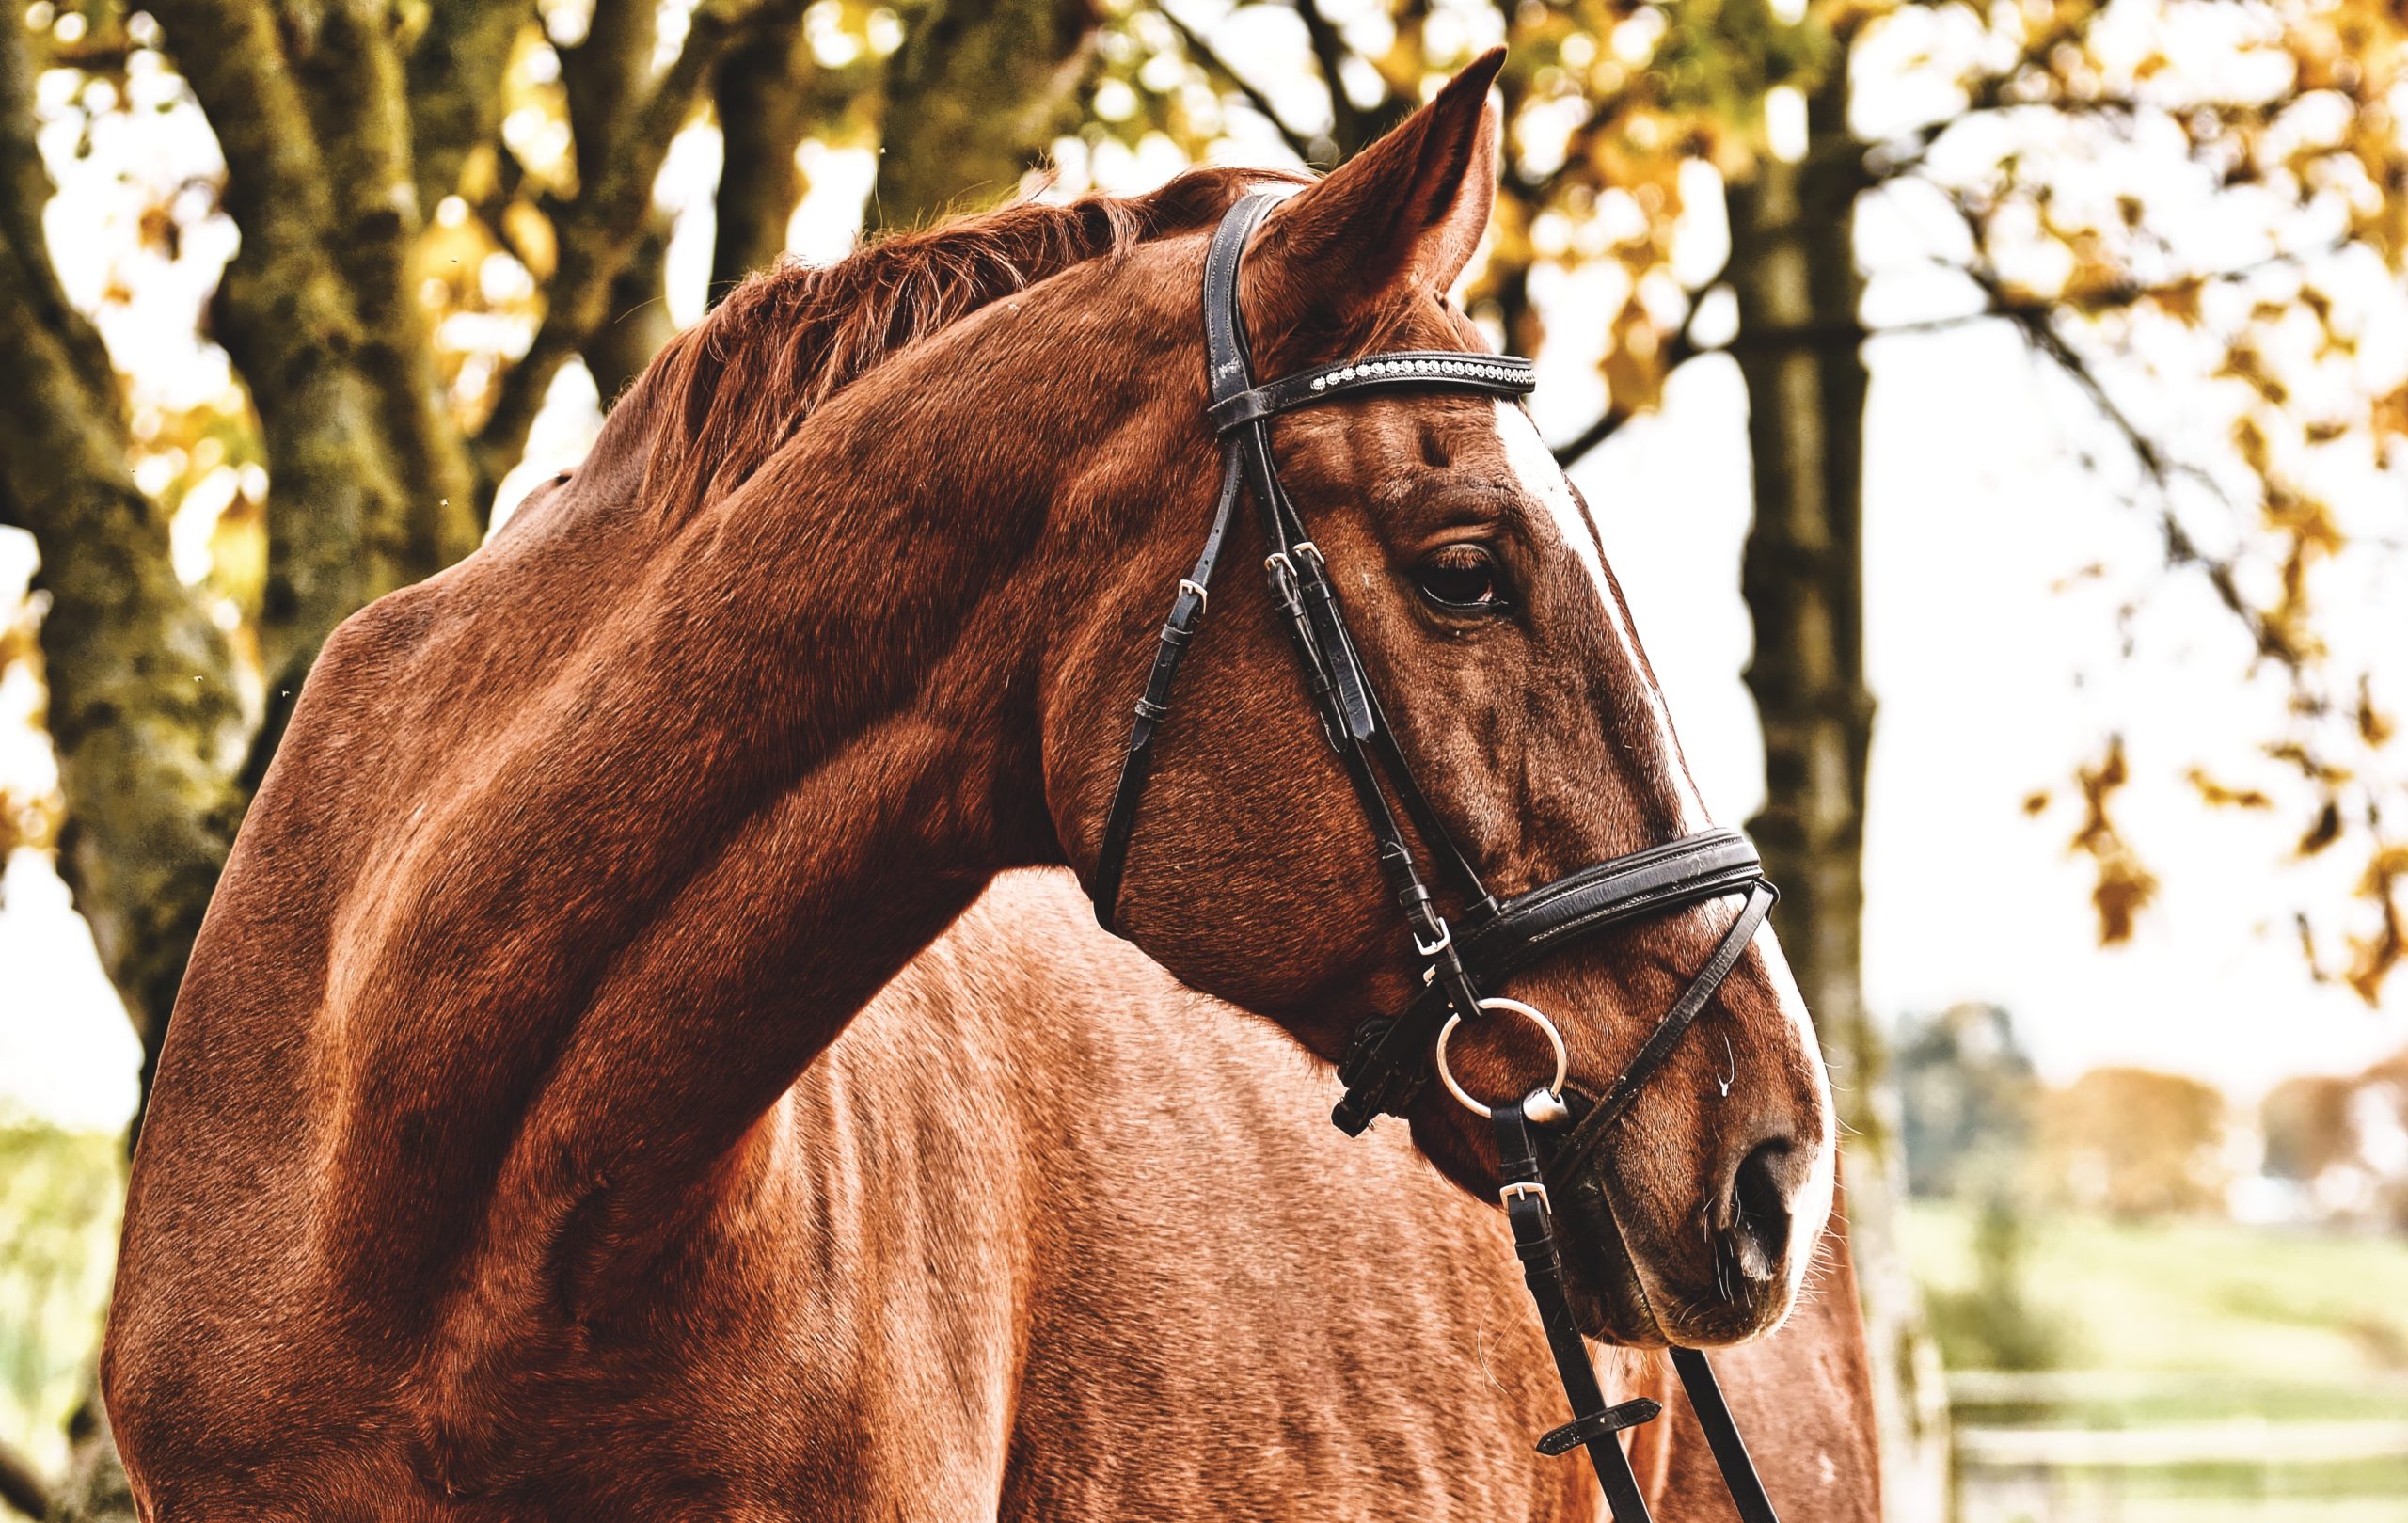 How do you value horses within your business?